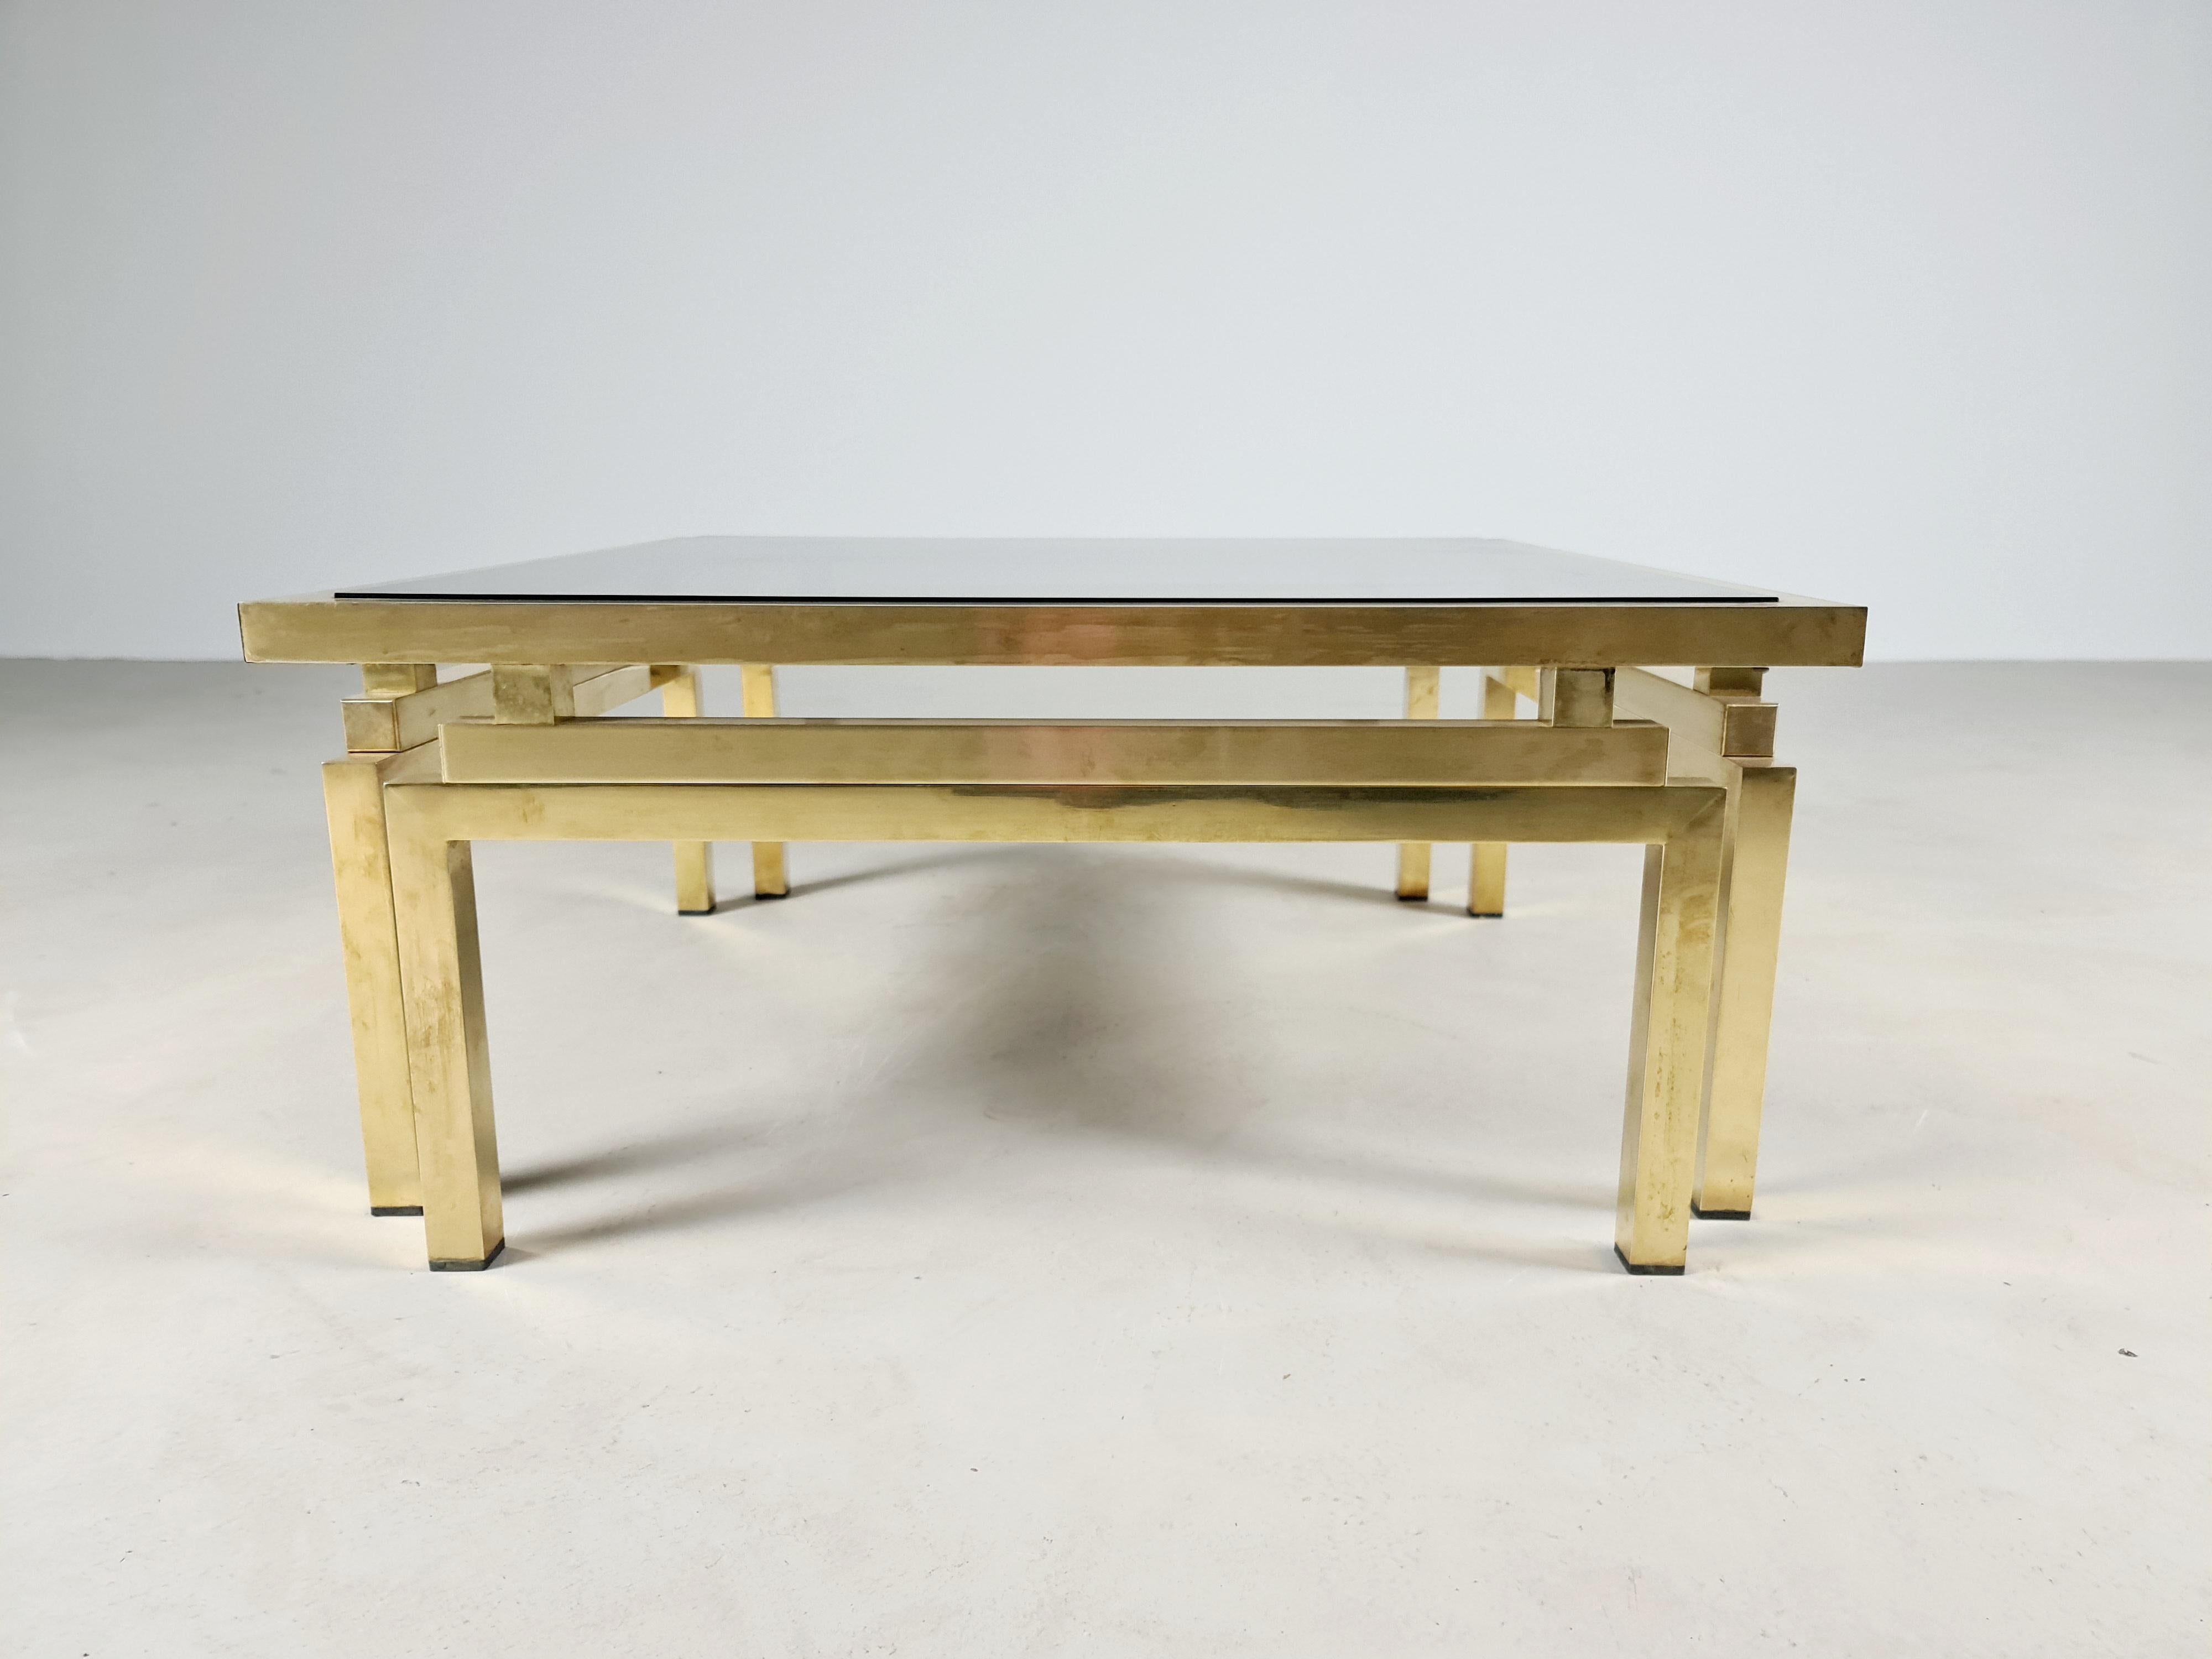 Romeo Rega coffee table in Hollywood regency style from the 70s, brass structure and architecturally shaped legs with smoked glass shelf.
The coffee table is a piece of exceptional manufacturing quality.